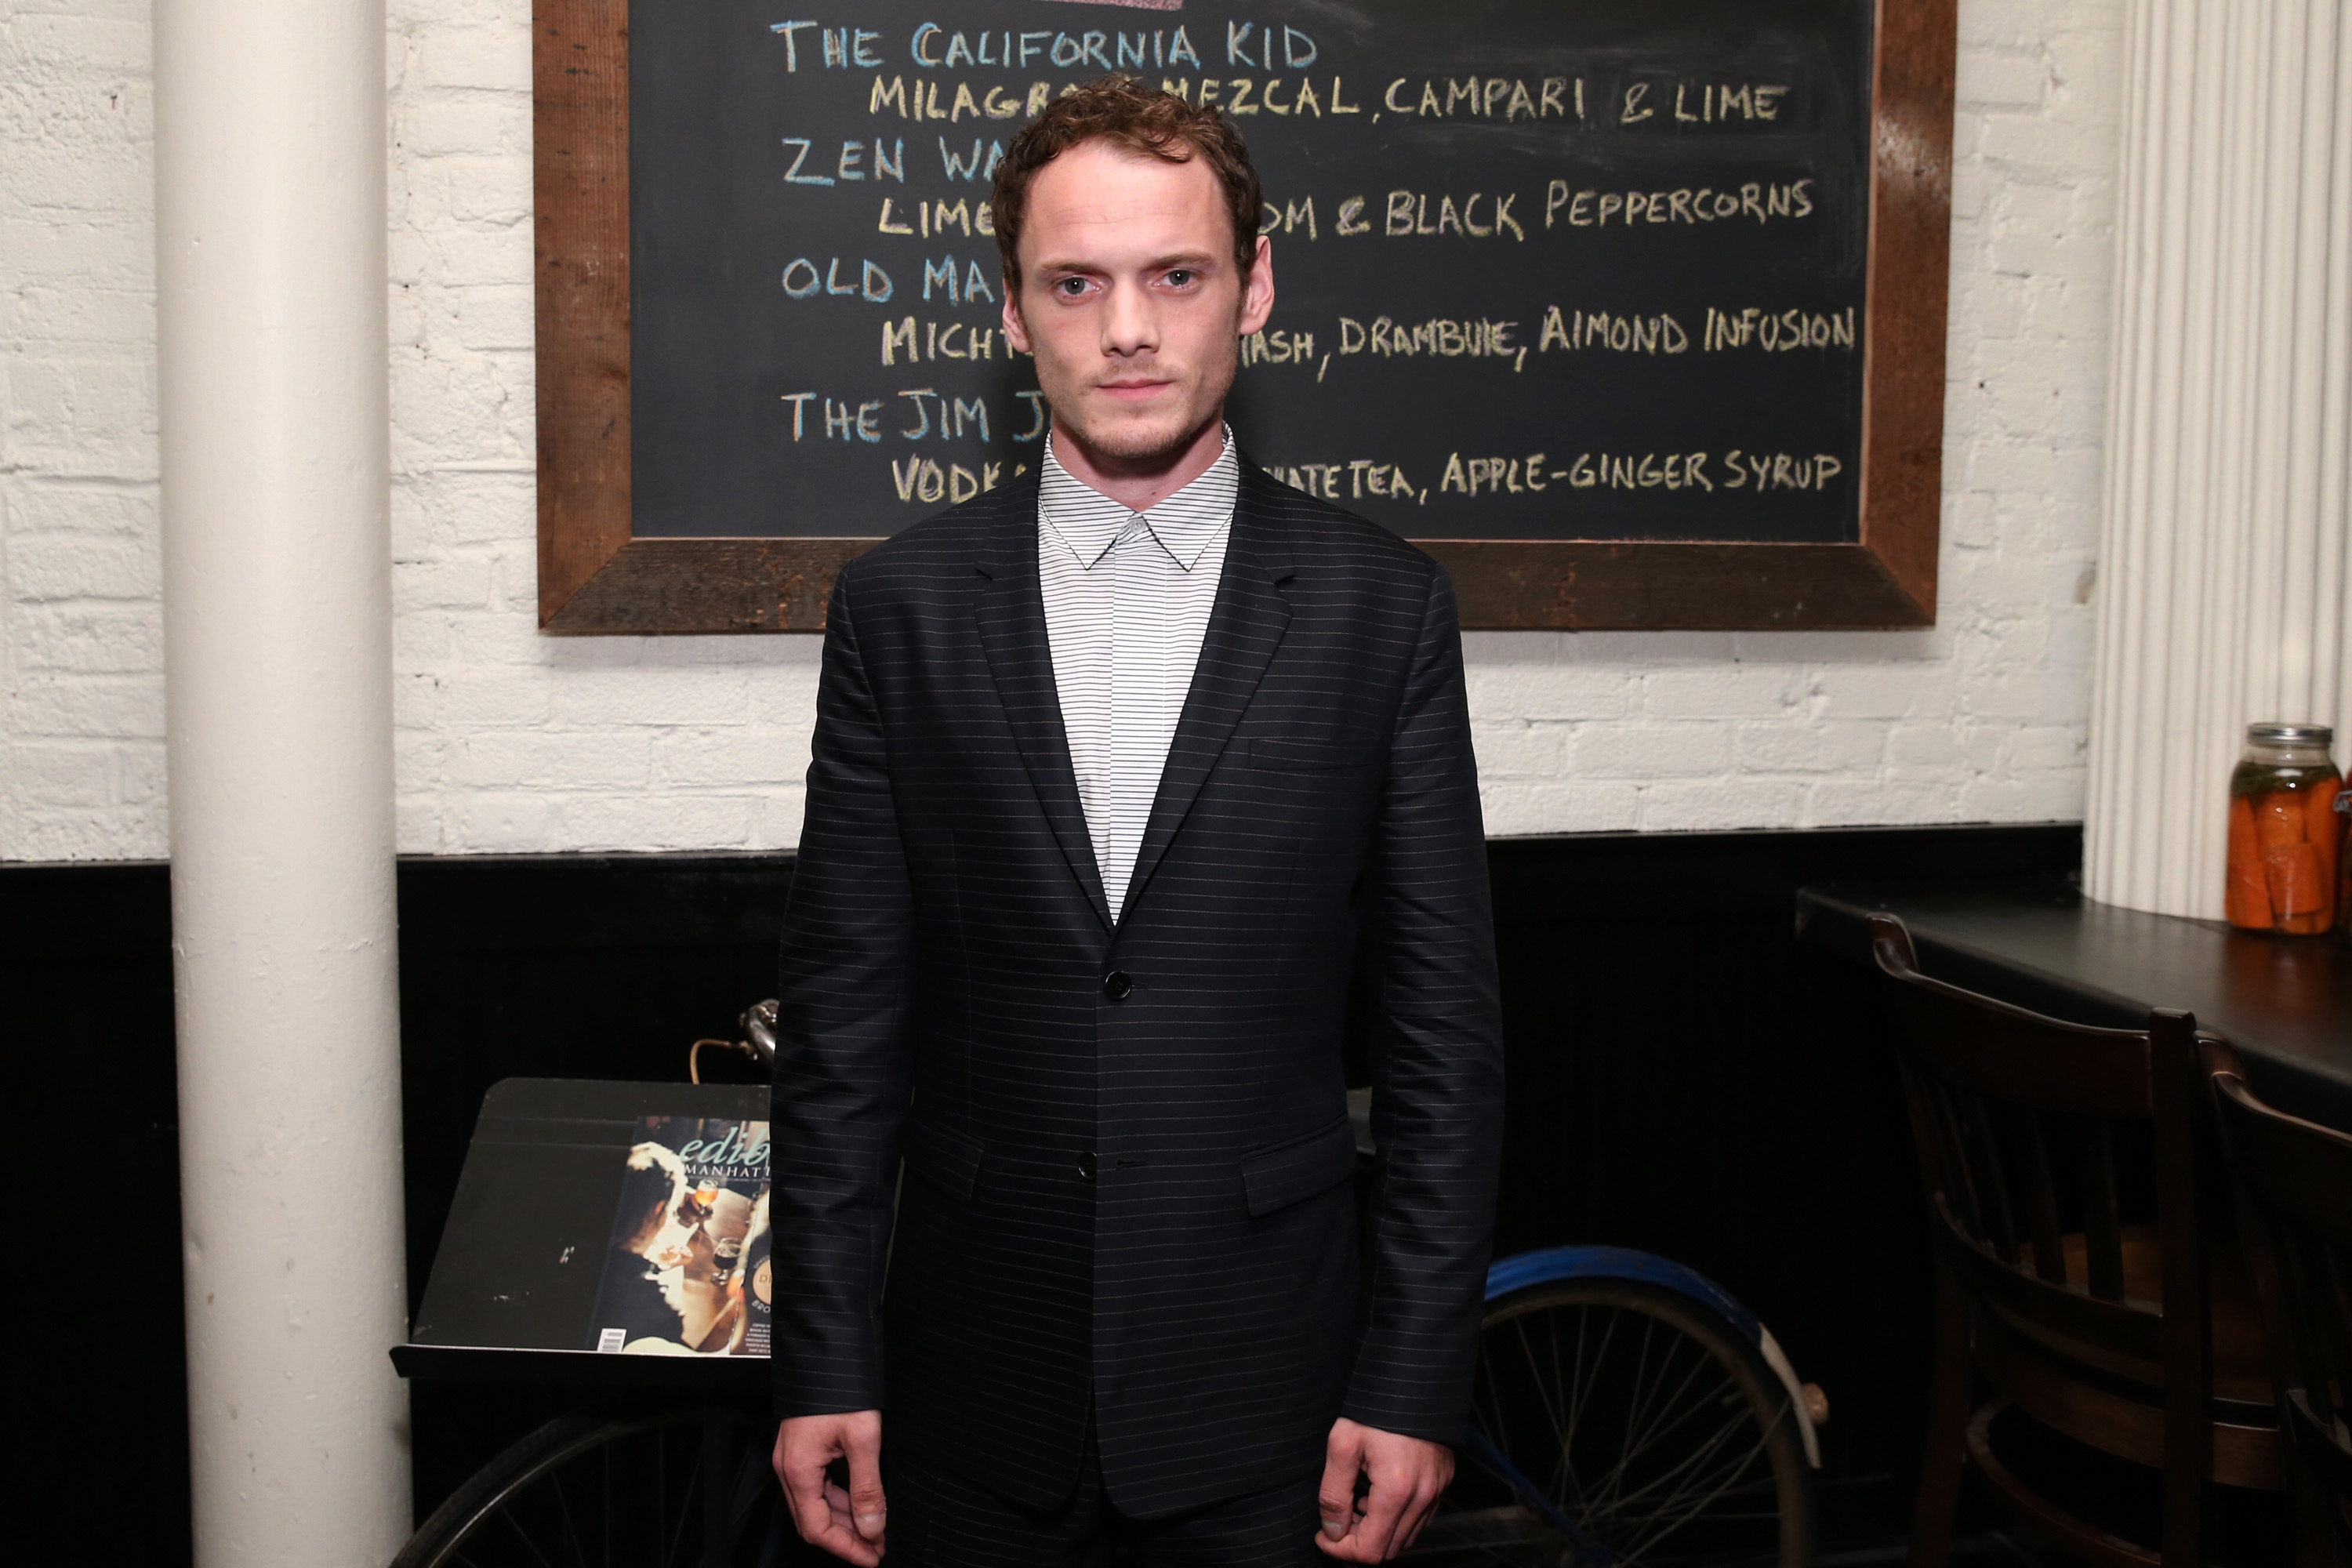 NEW YORK, NY - APRIL 18: Actor Anton Yelchin attends the 2015 Tribeca Film Festival 2015 After Party for "Driftless Area" at Almond on April 18, 2015 in New York City.   Neilson Barnard/Getty Images for 2015 Tribeca Film Festival/AFP